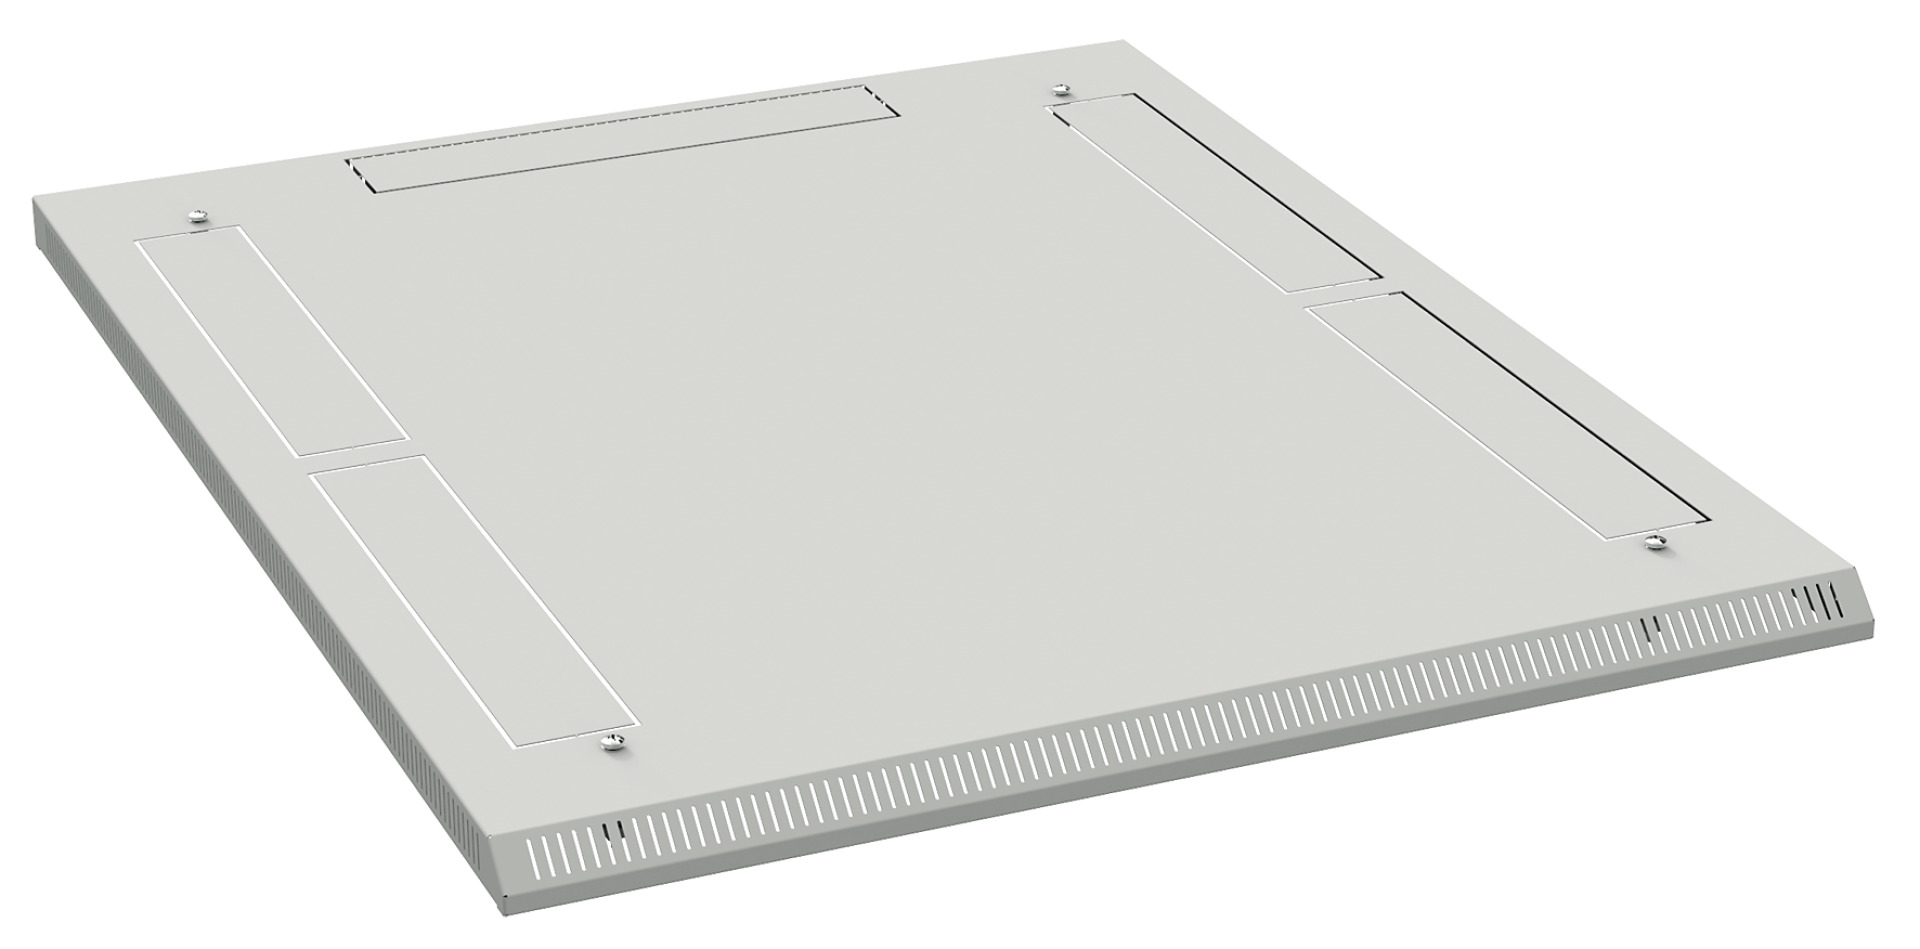 Additional Roof H=40 mm, 800x1000 mm, RAL9005, for Cabinet Series PRO